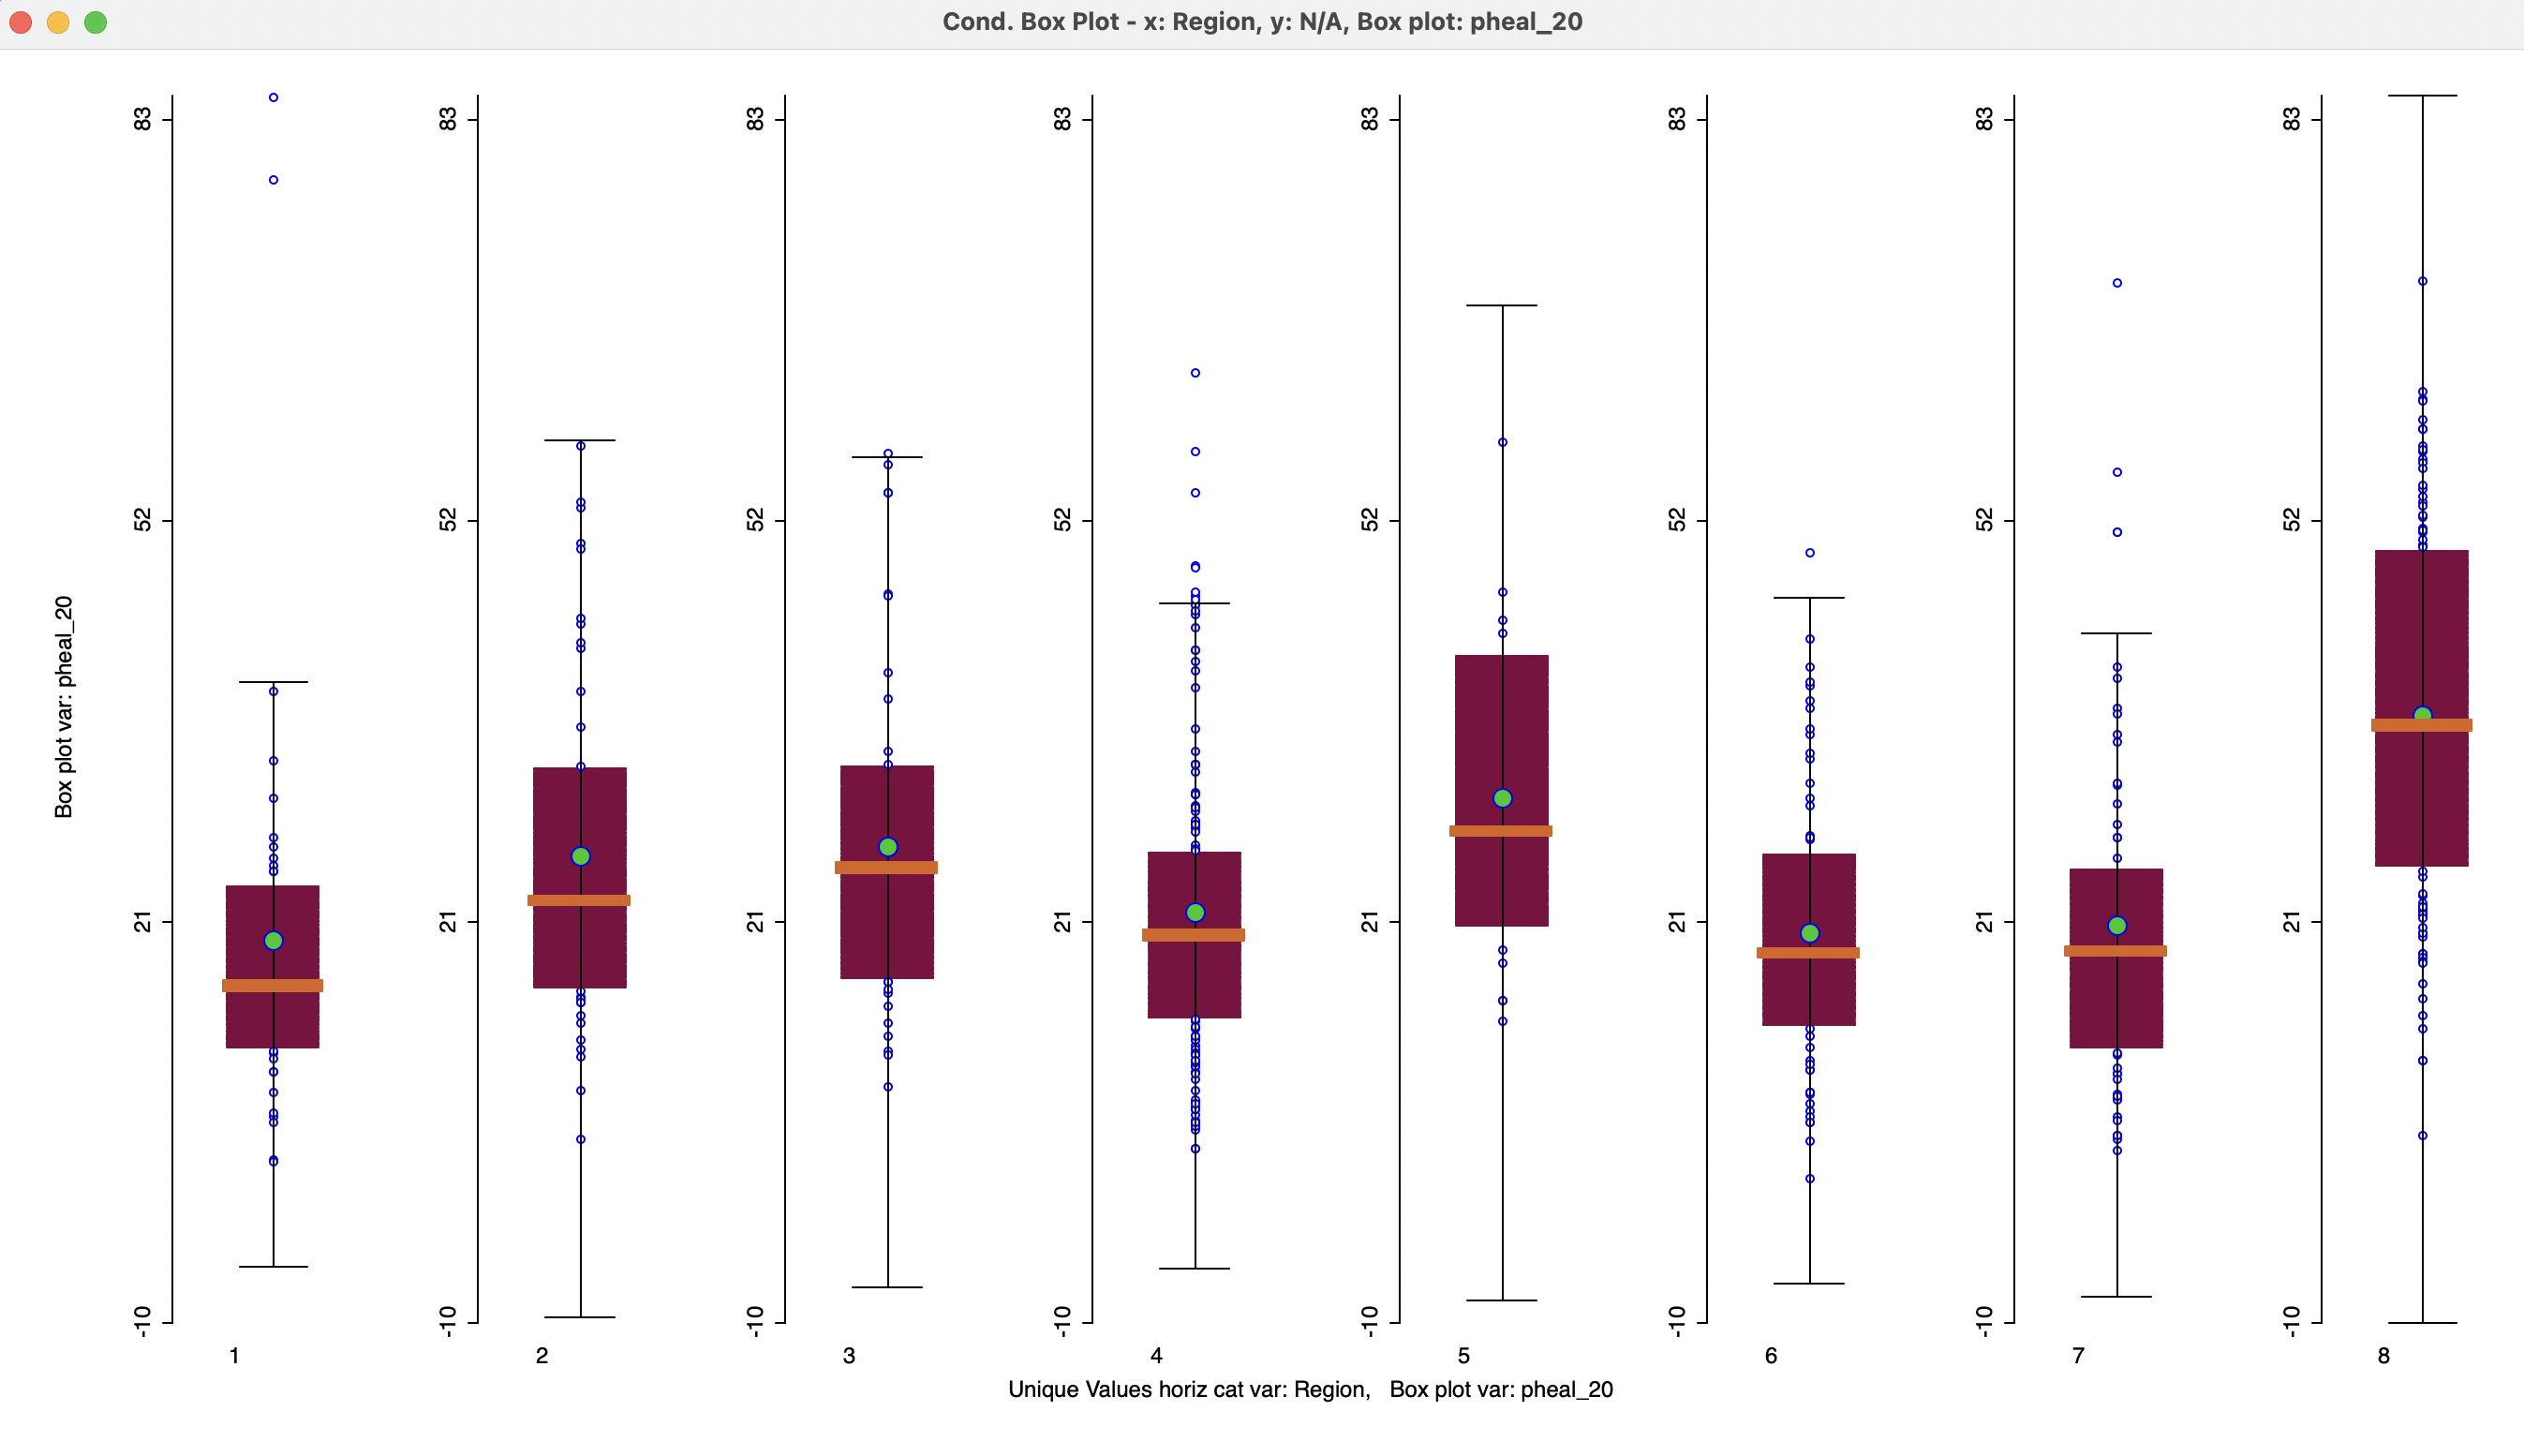 Conditional box plot - lack of health access by region